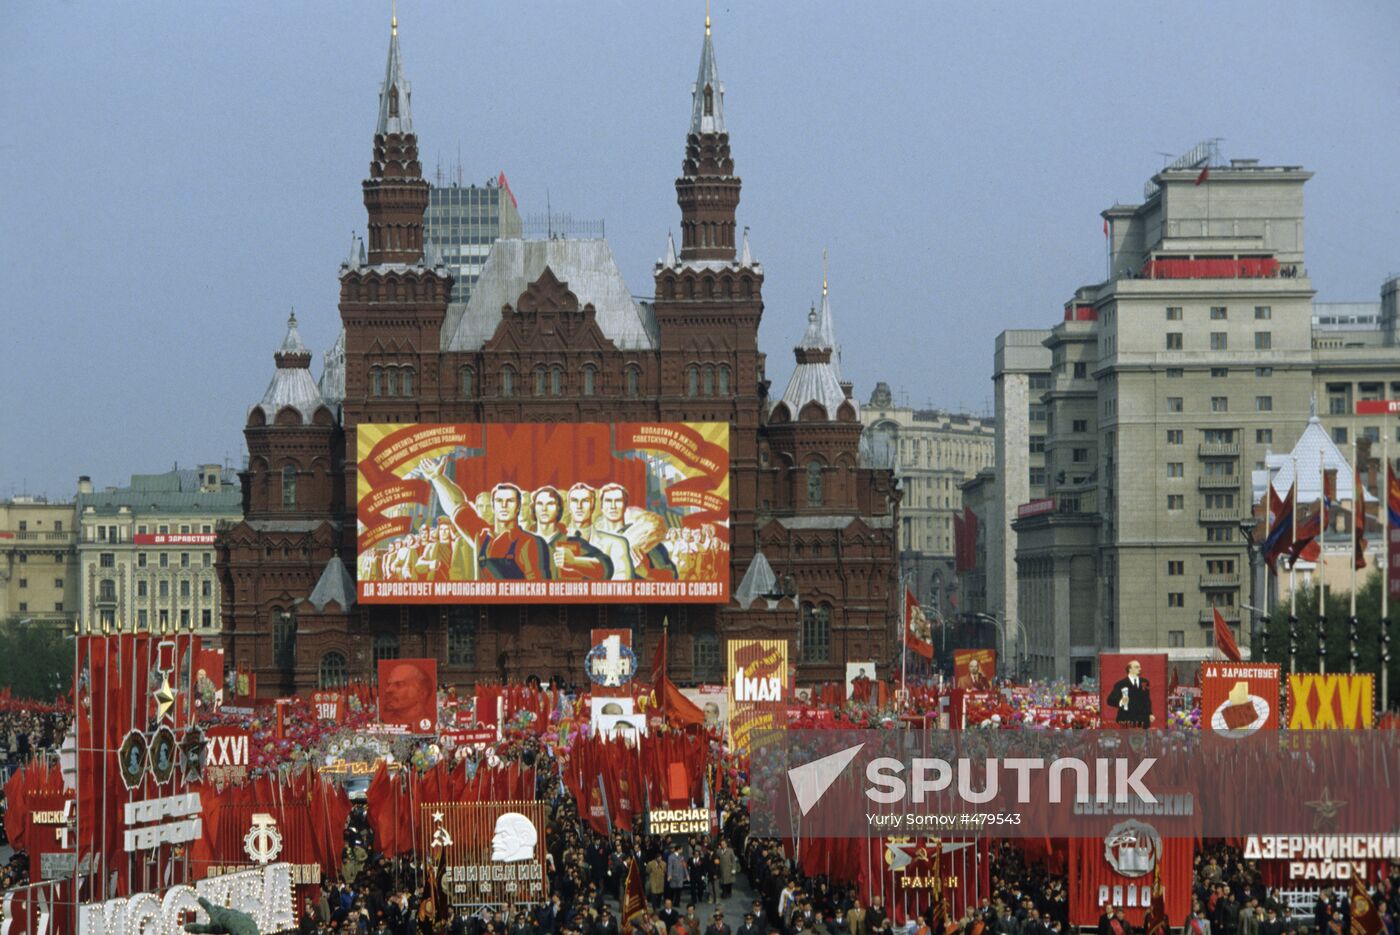 May 1 demonstration on Red square